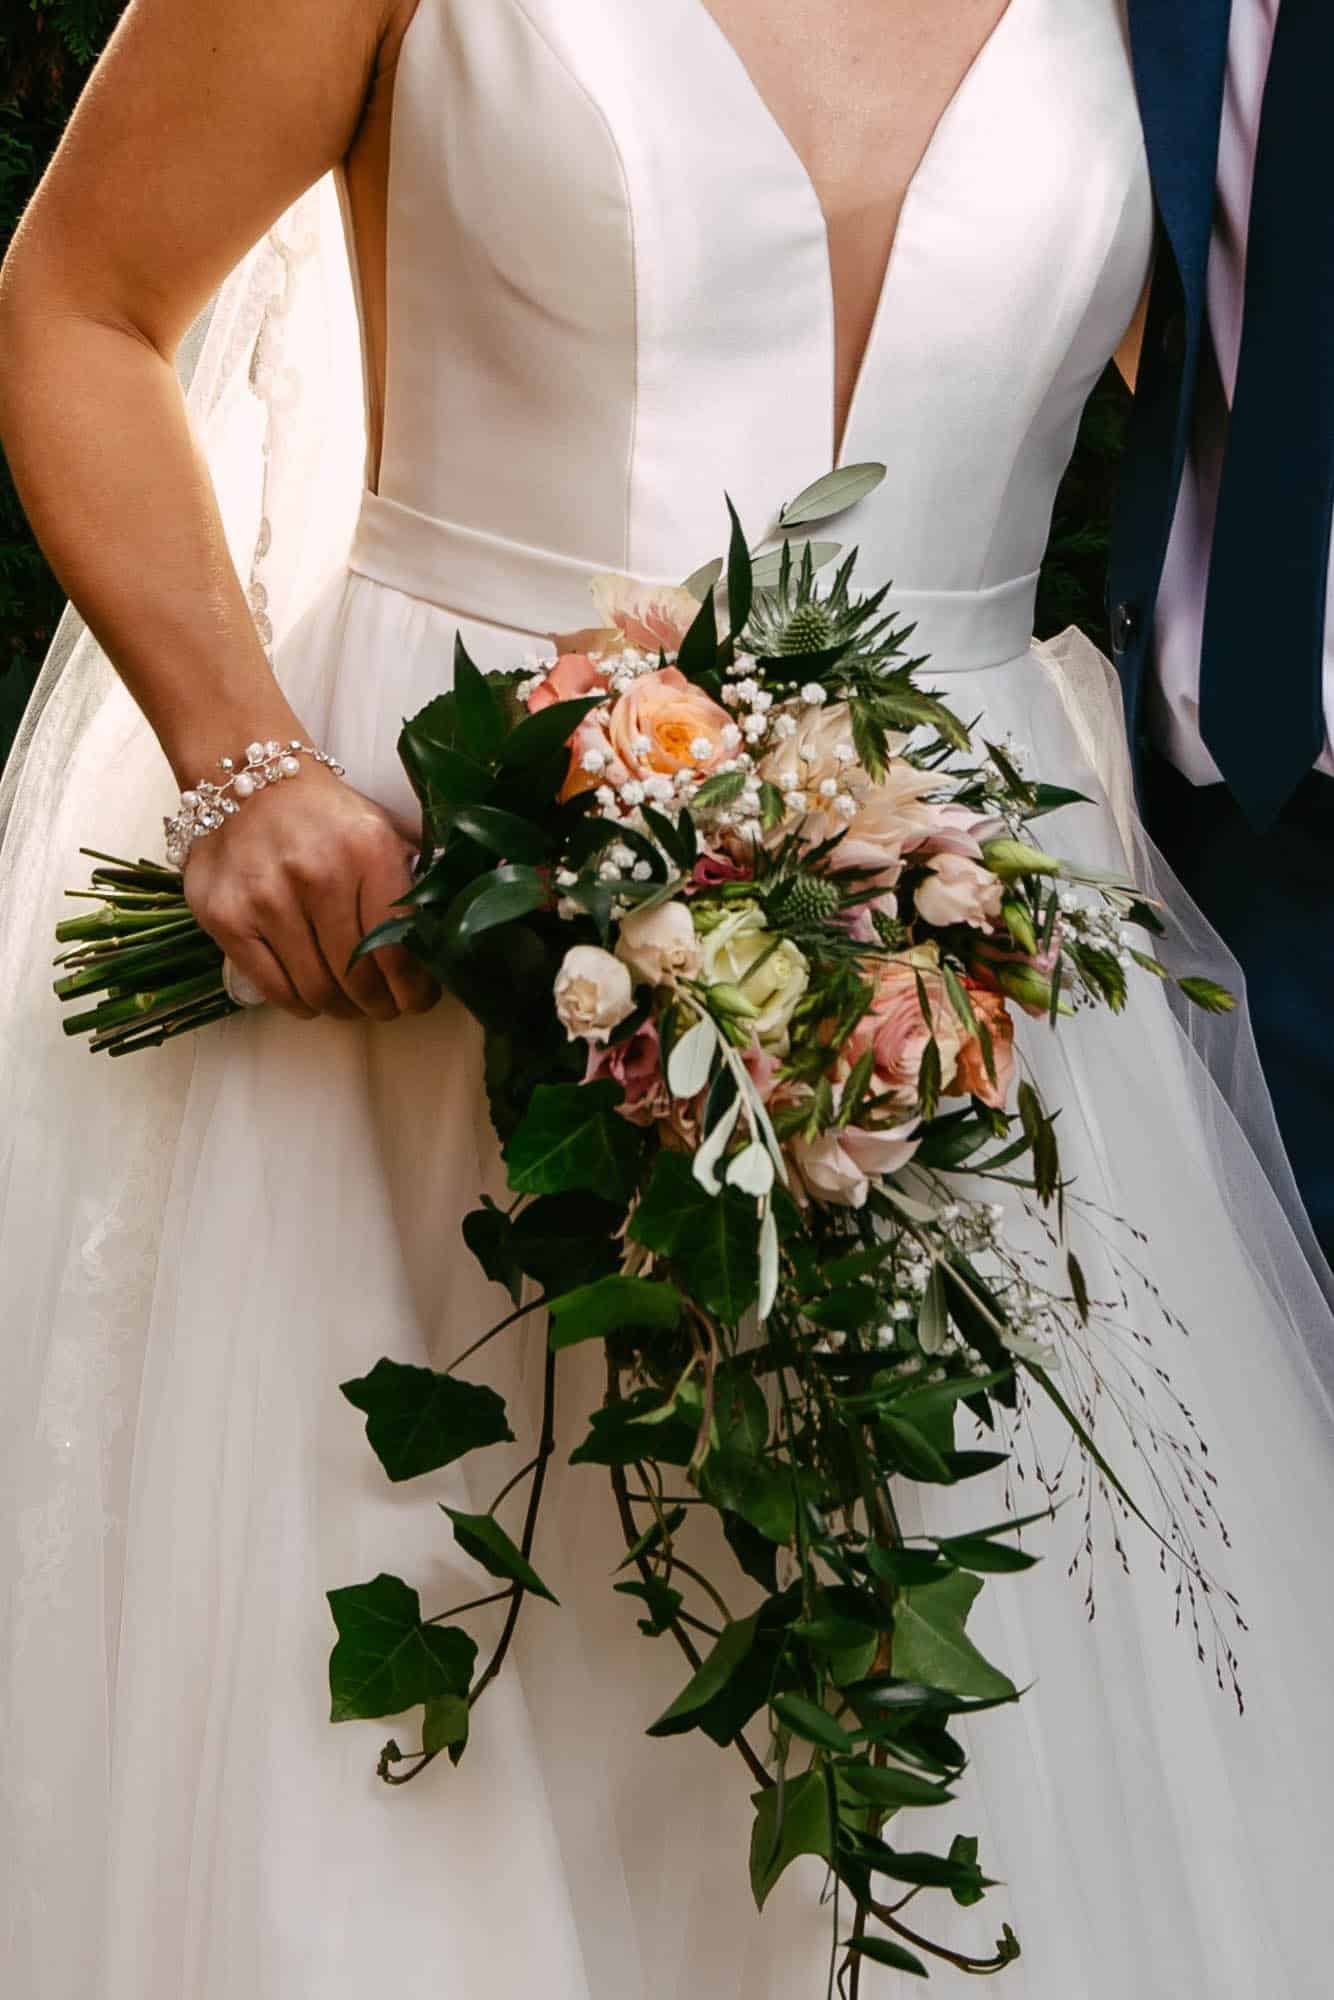 A bride and groom hold a wedding bouquet.